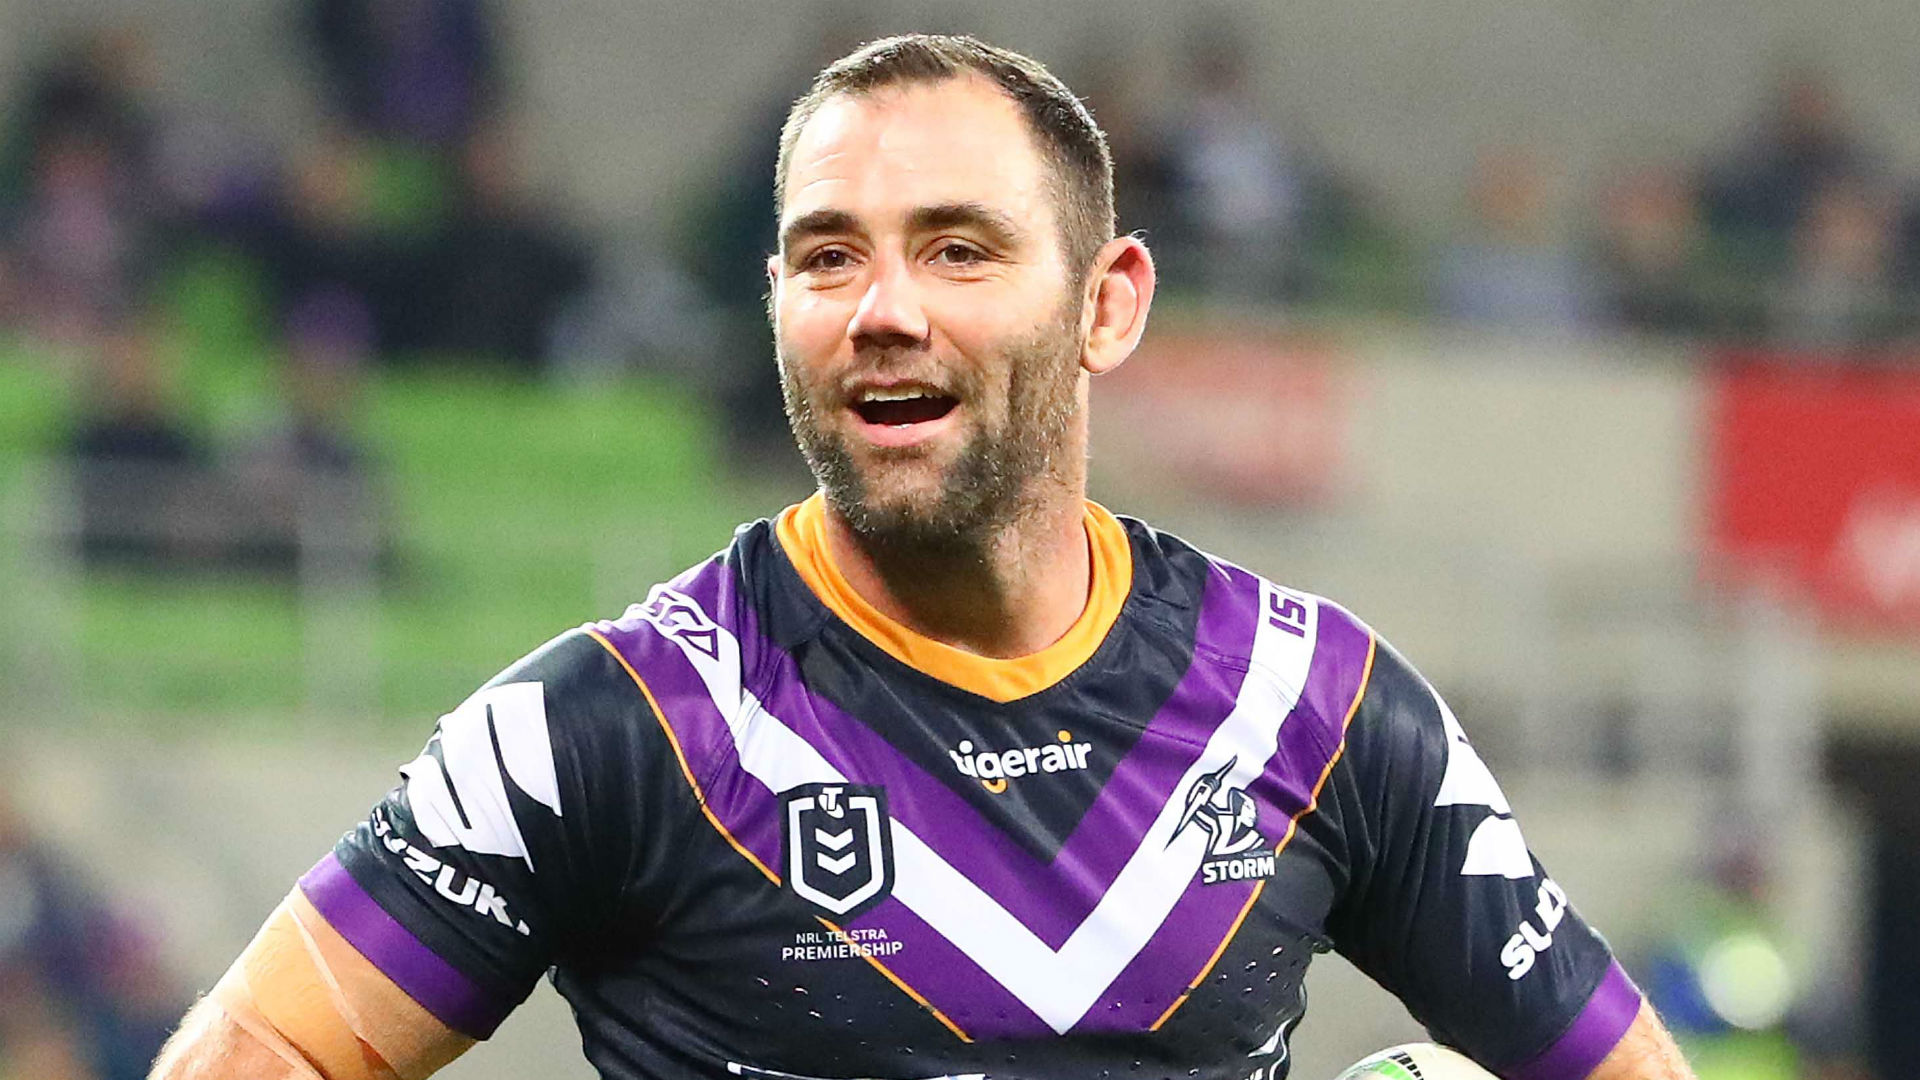 After painful defeats last week, Melbourne Storm and South Sydney Rabbitohs will hope to bounce back in the NRL semi-finals.